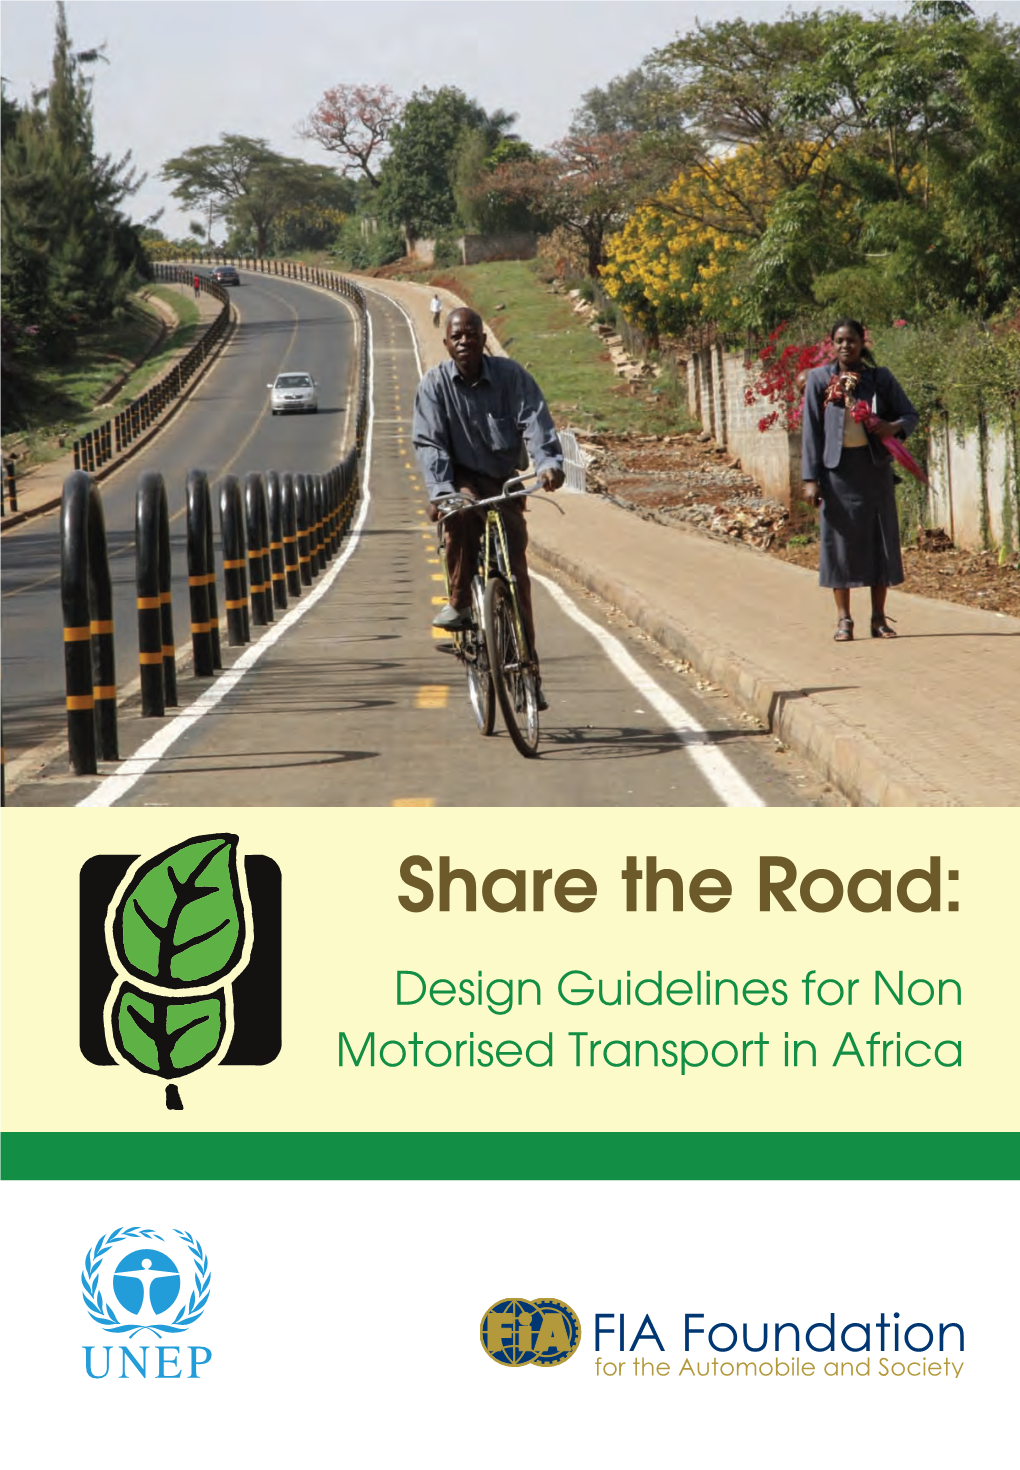 Share the Road's Design Guidelines For